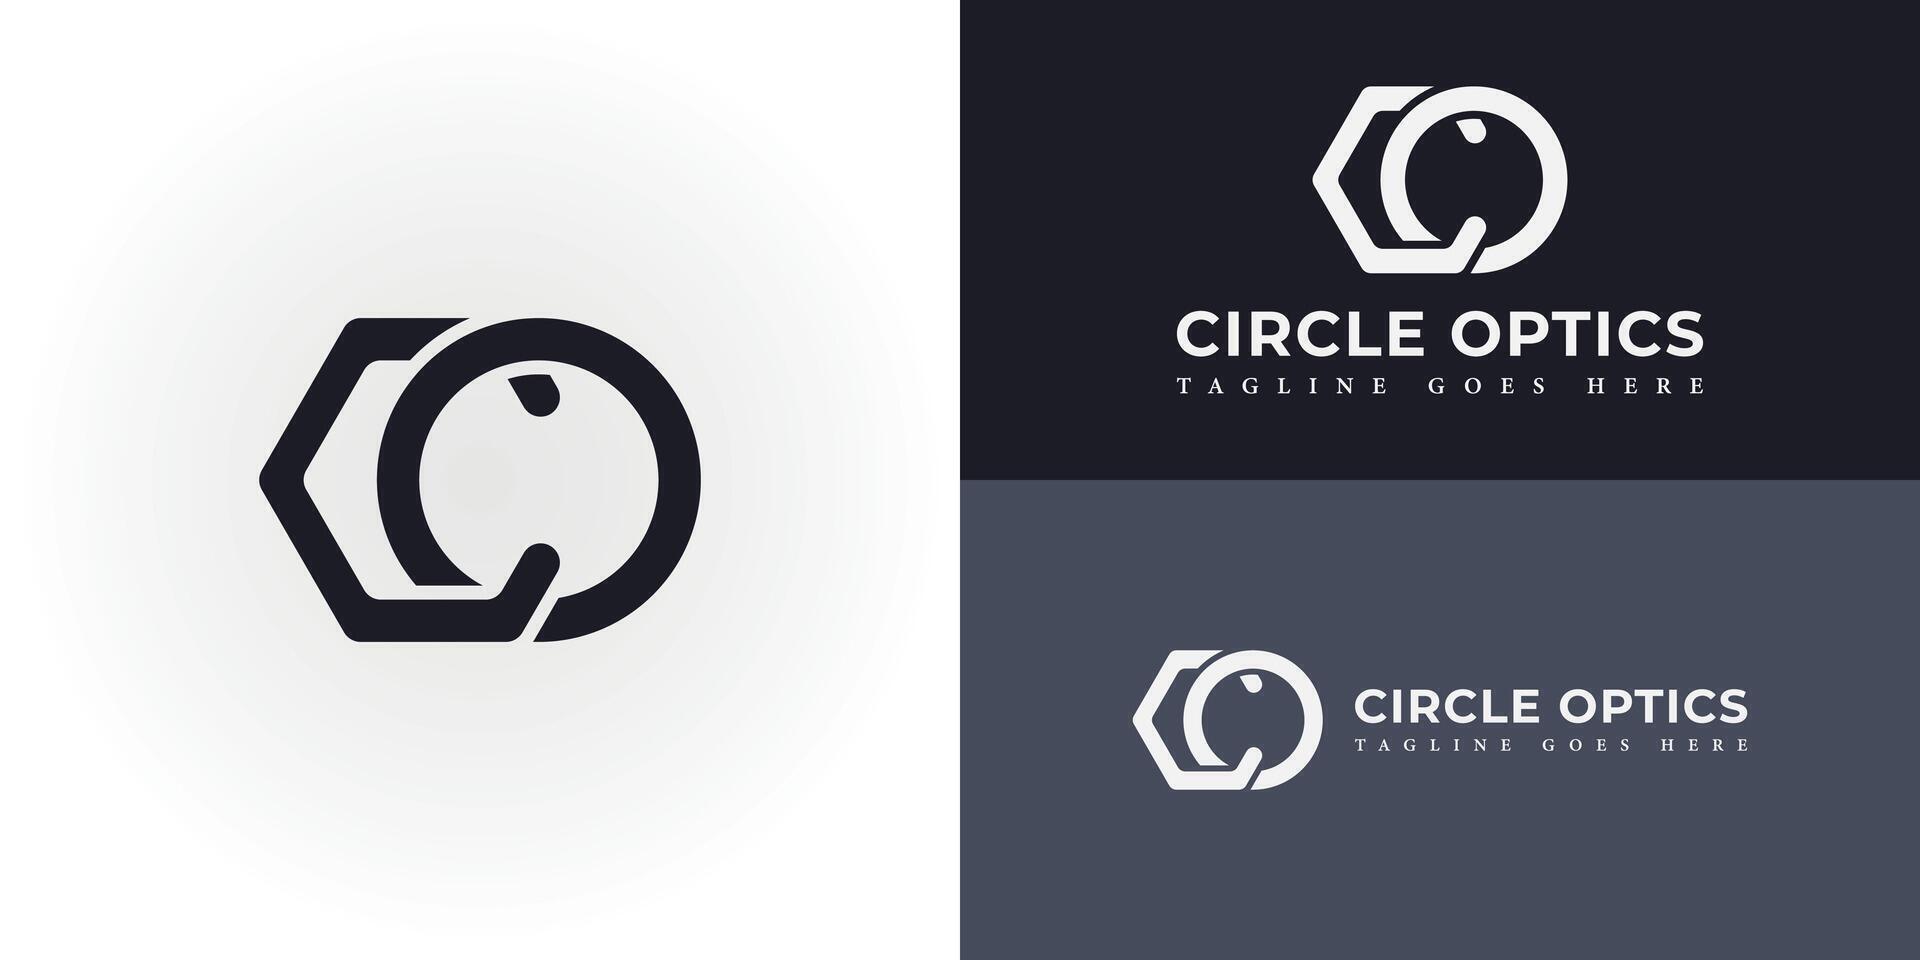 Abstract initial letter CO or OC logo in black color isolated in multiple backgrounds. Initial Letter CO Rounded Linked Circle Lowercase Logo. Black rounded letter CO logo for optical business logo vector